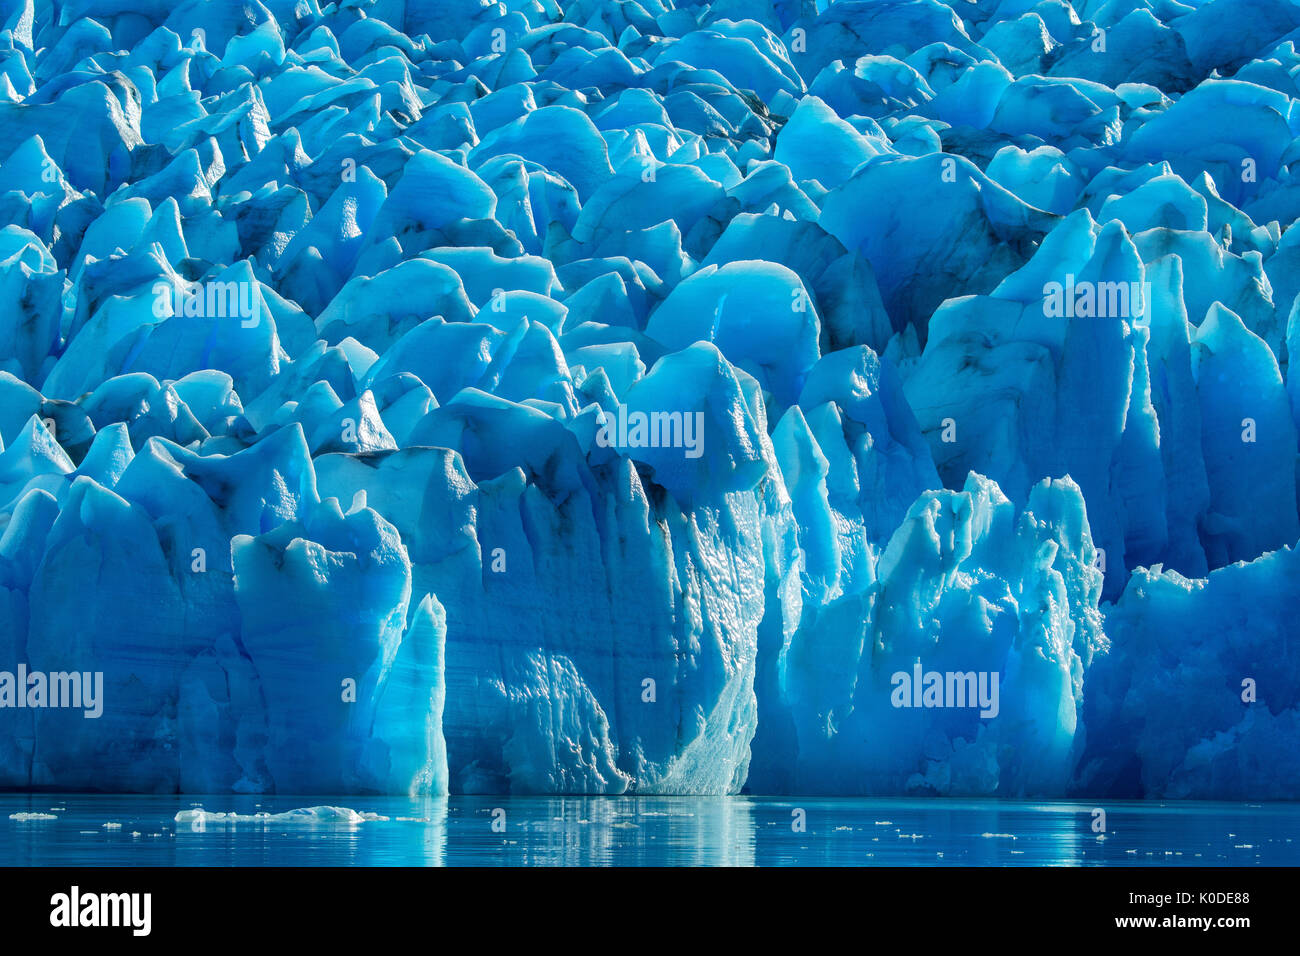 South America, Andes, Patagonia, Torres del Paine, UNESCO World Heritage, National Park, Lago Grey glacier Stock Photo